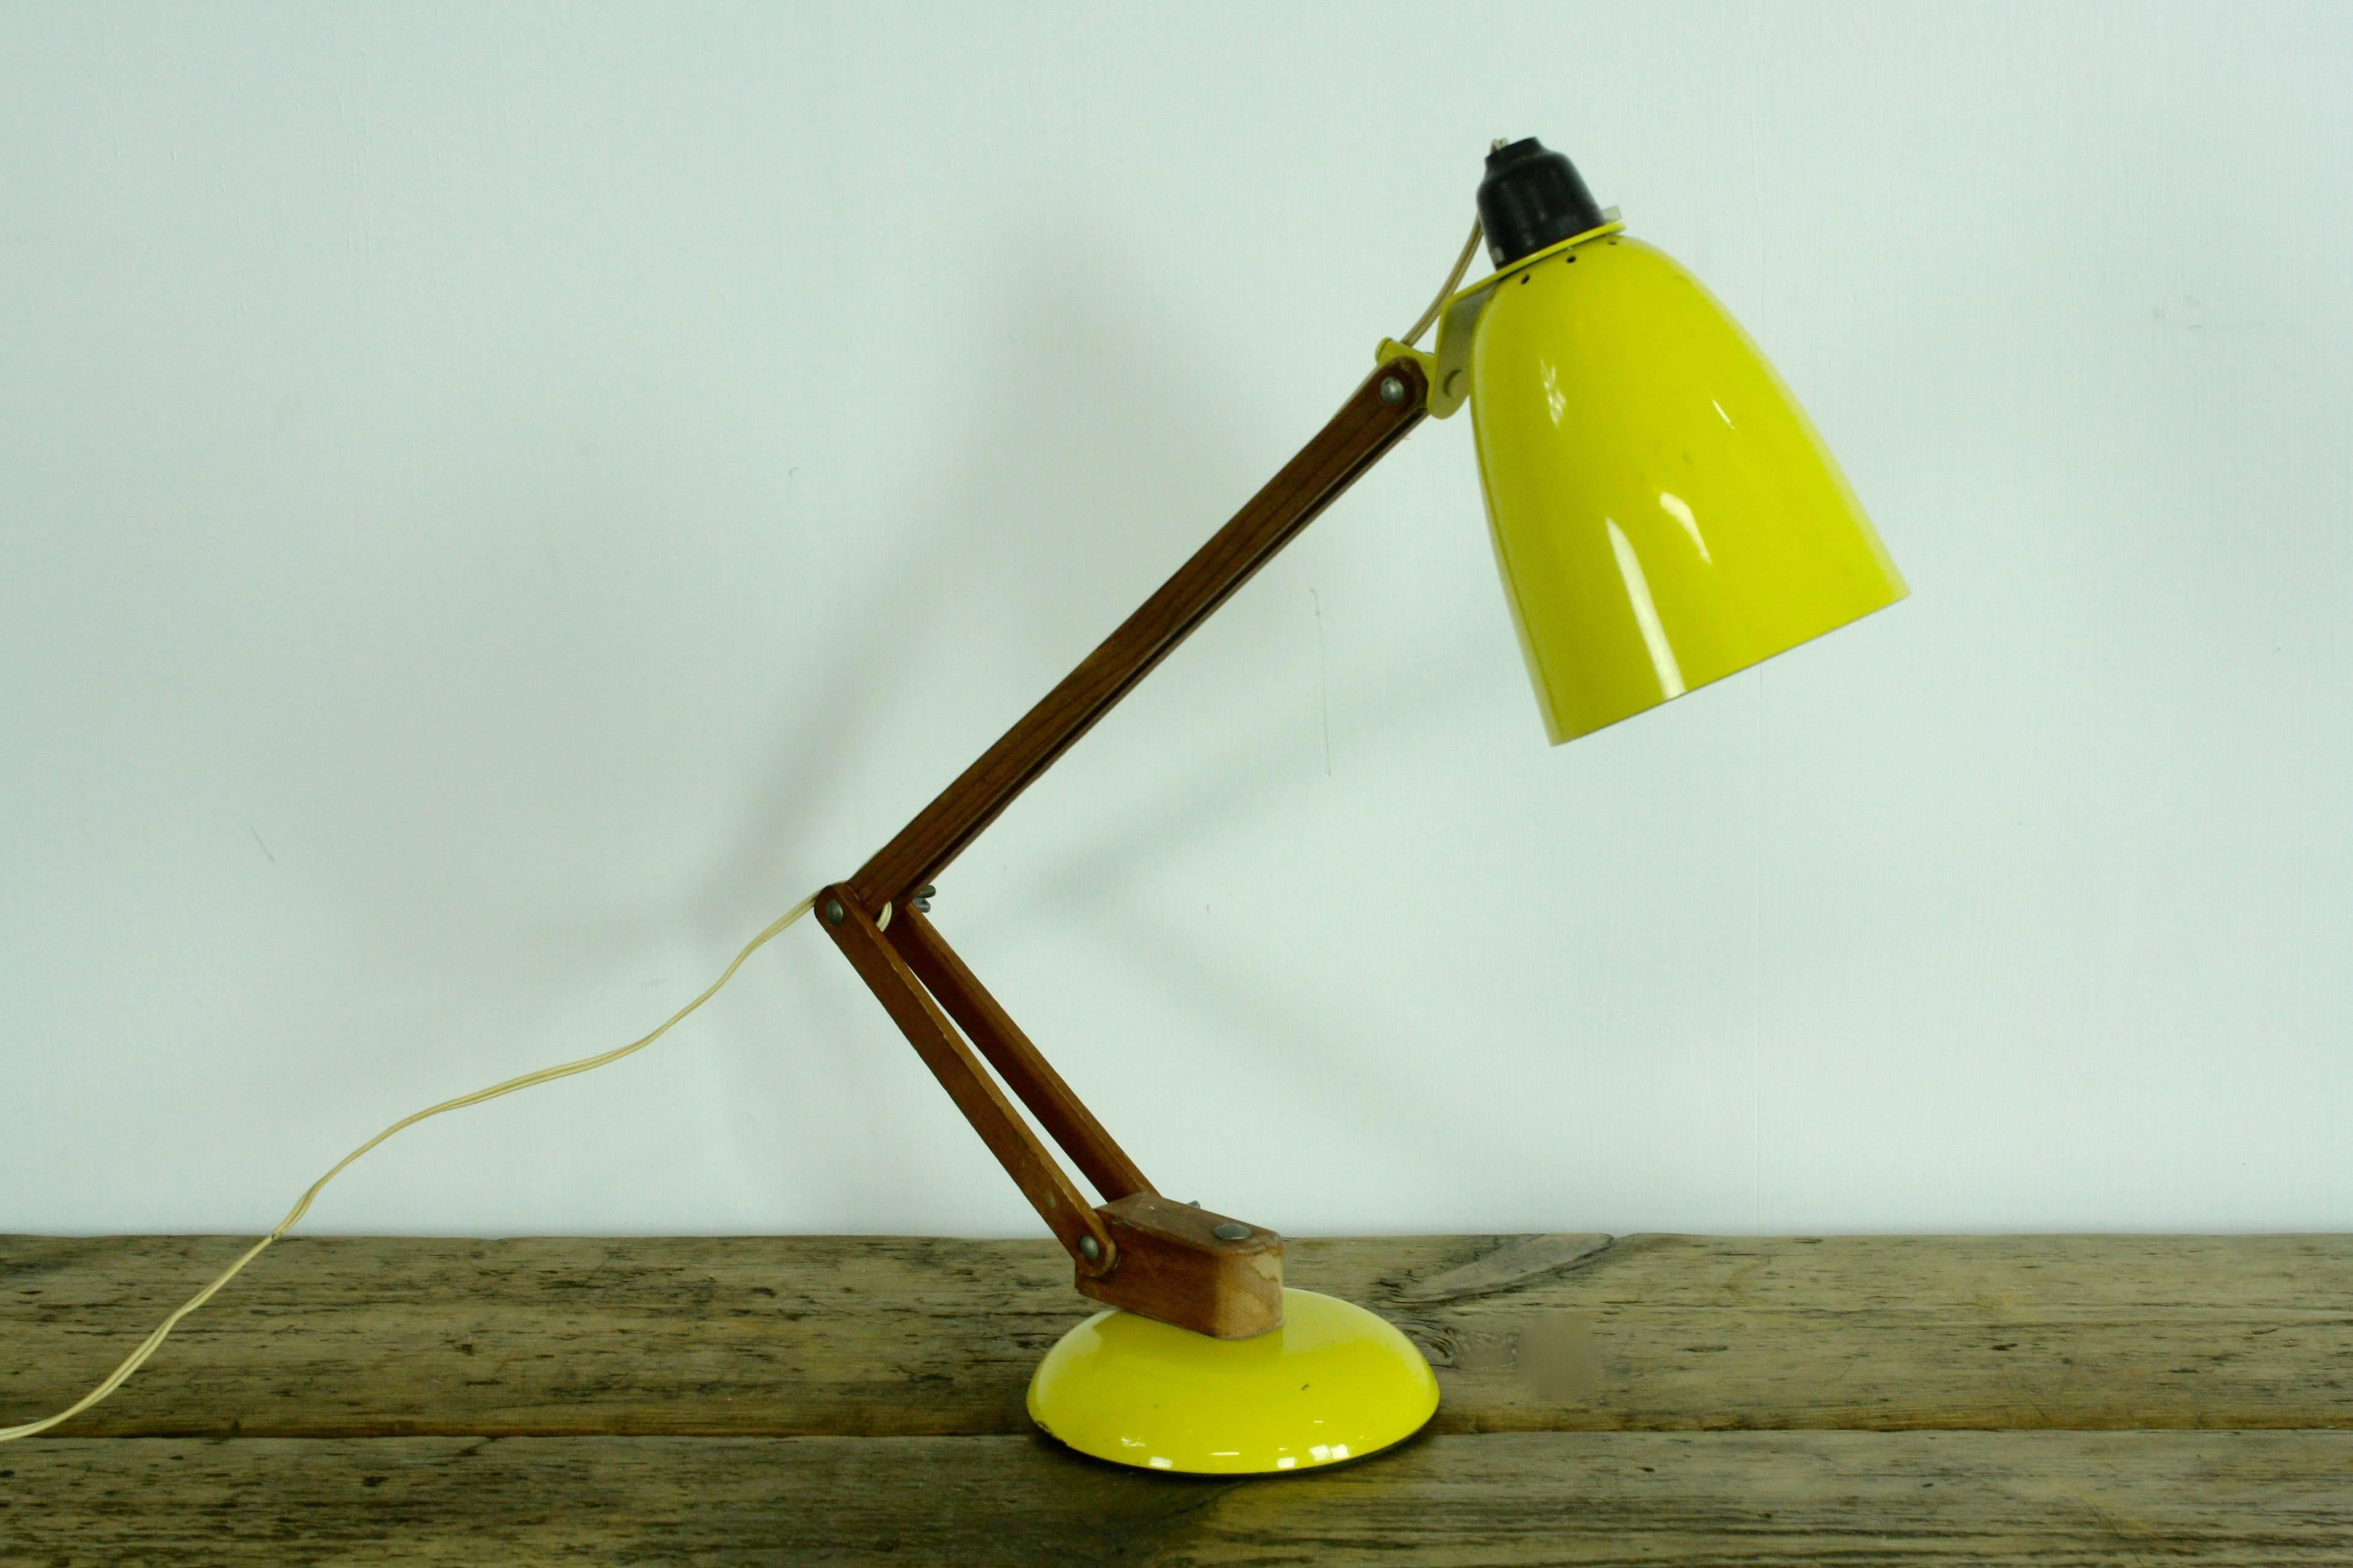 Vintage Maclamp desk/table lamp in yellow with much sought-after wooden arms. Original bulbholder and flex.

Designed by Terence Conran for Habitat in the 1950s, this lamp is an icon of the 1950s-1960s period.

In overall good vintage condition